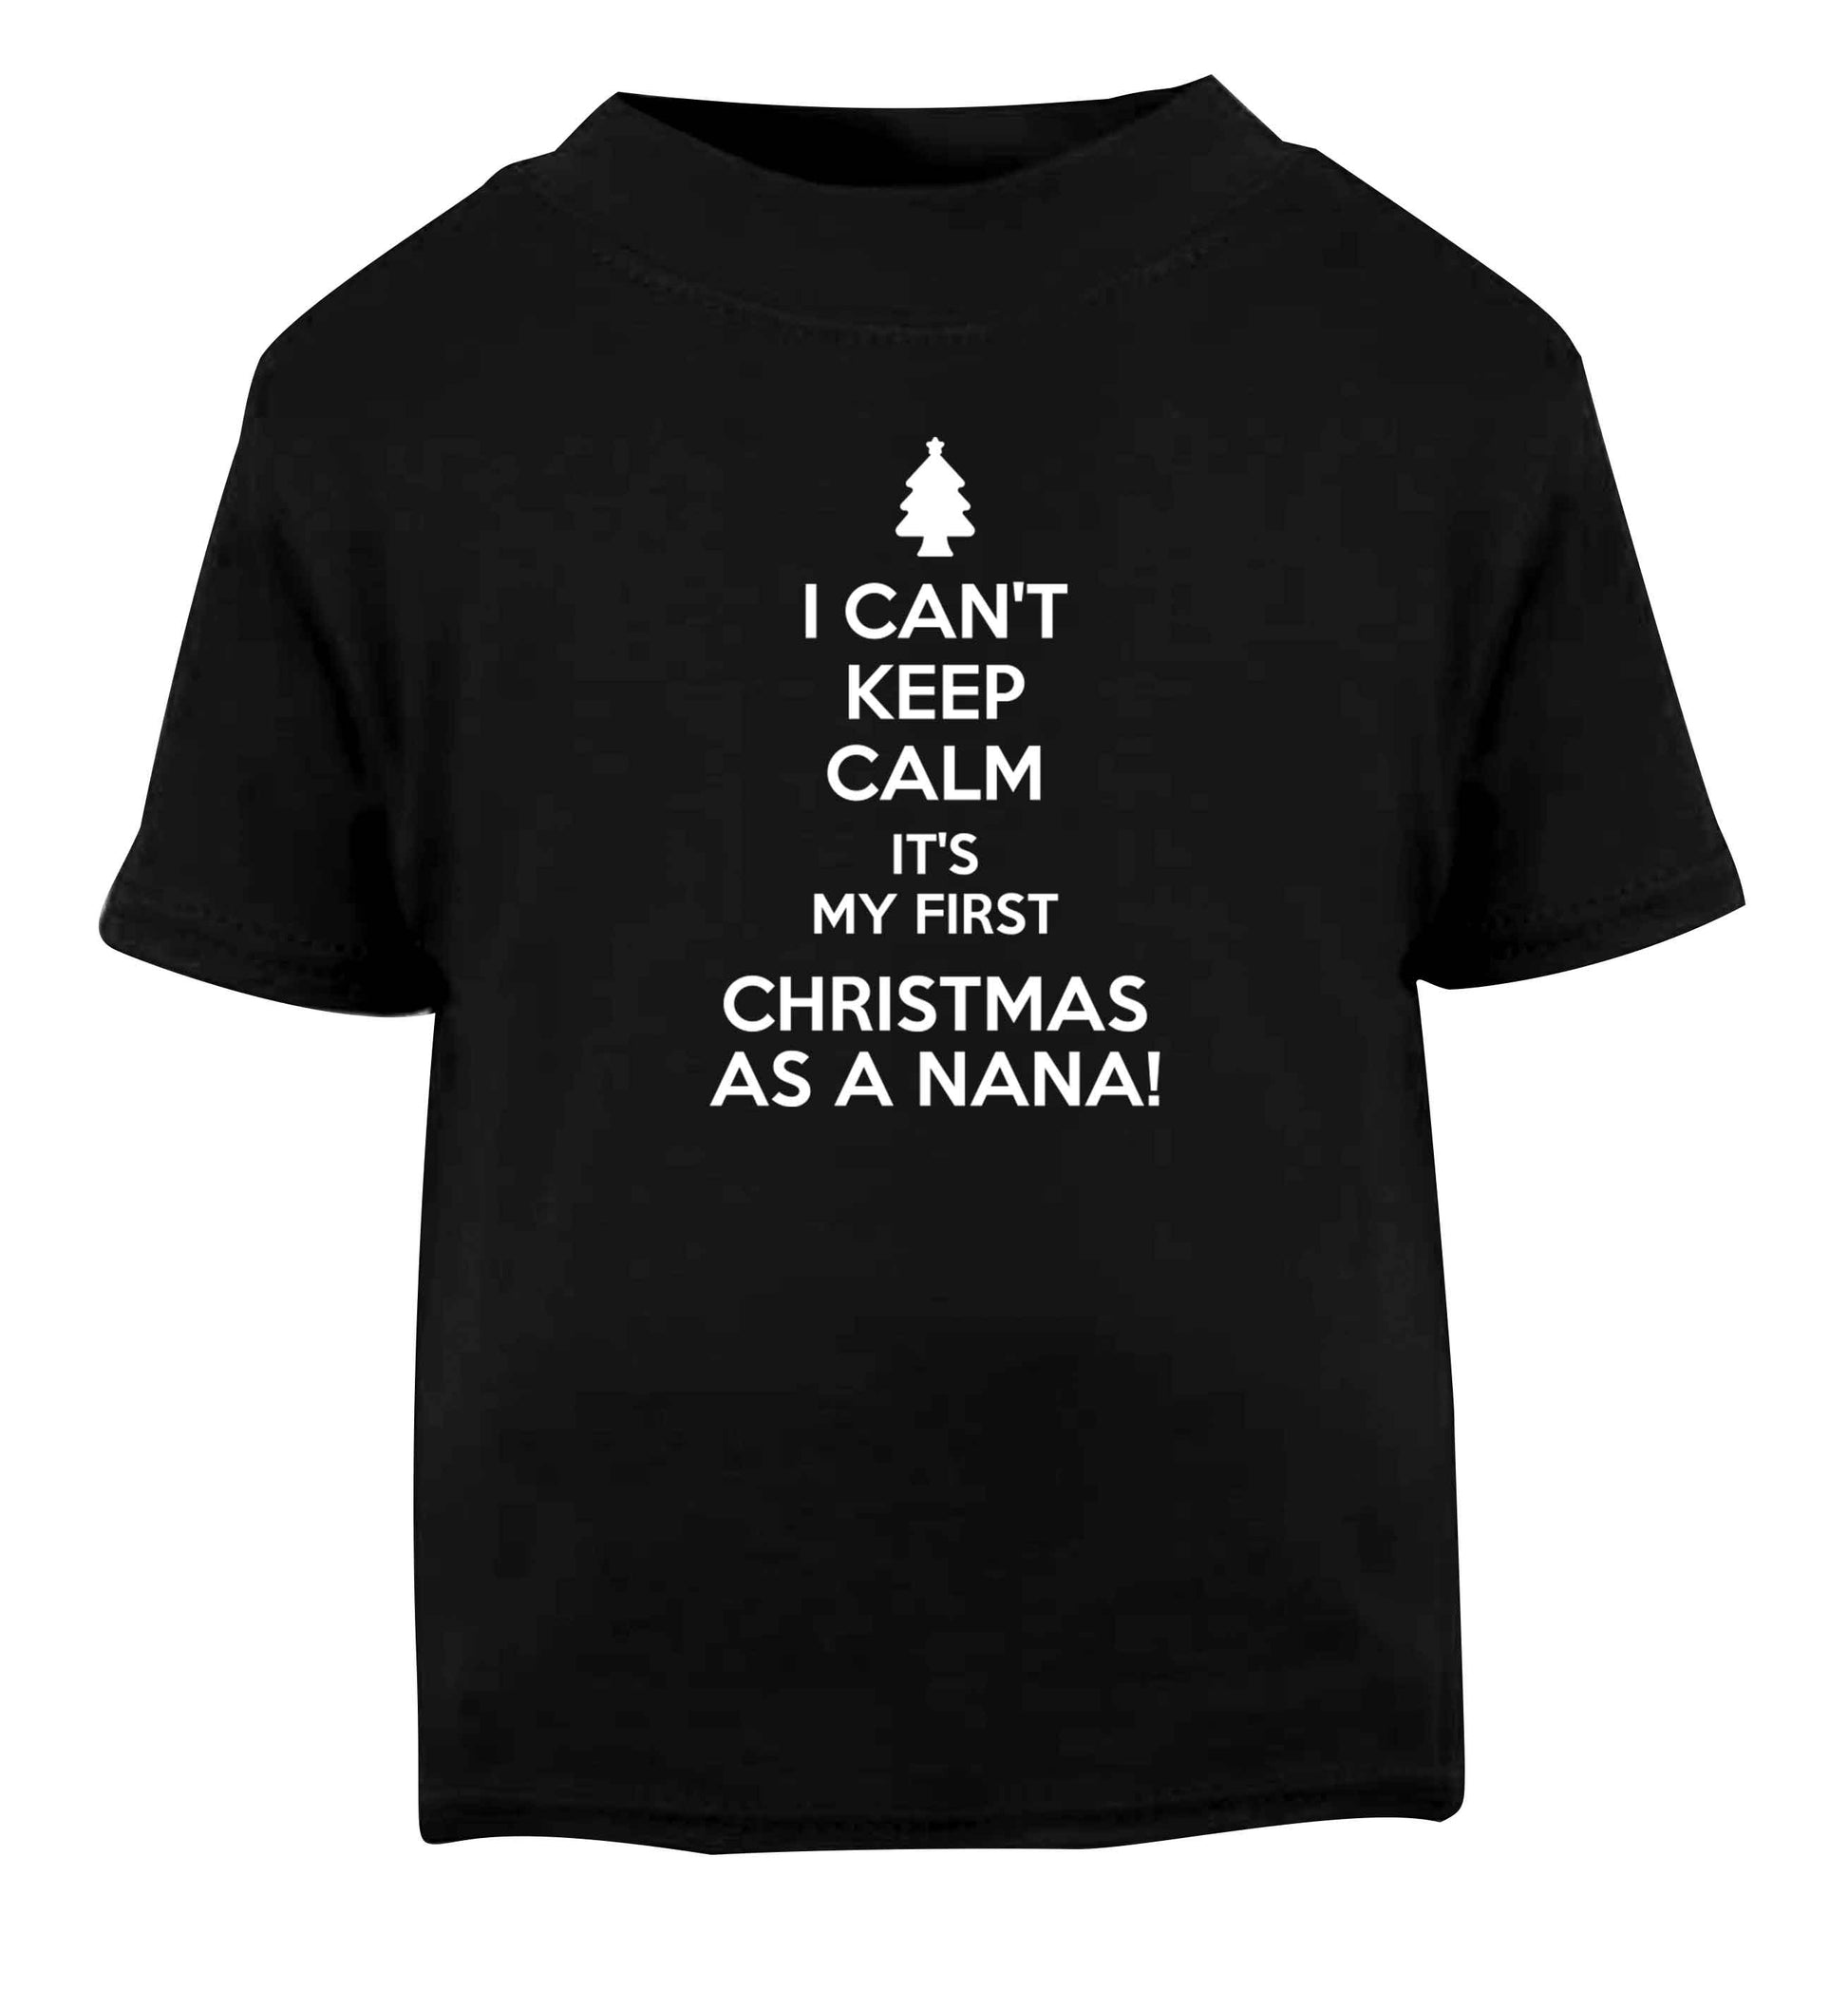 I can't keep calm it's my first Christmas as a nana! Black Baby Toddler Tshirt 2 years